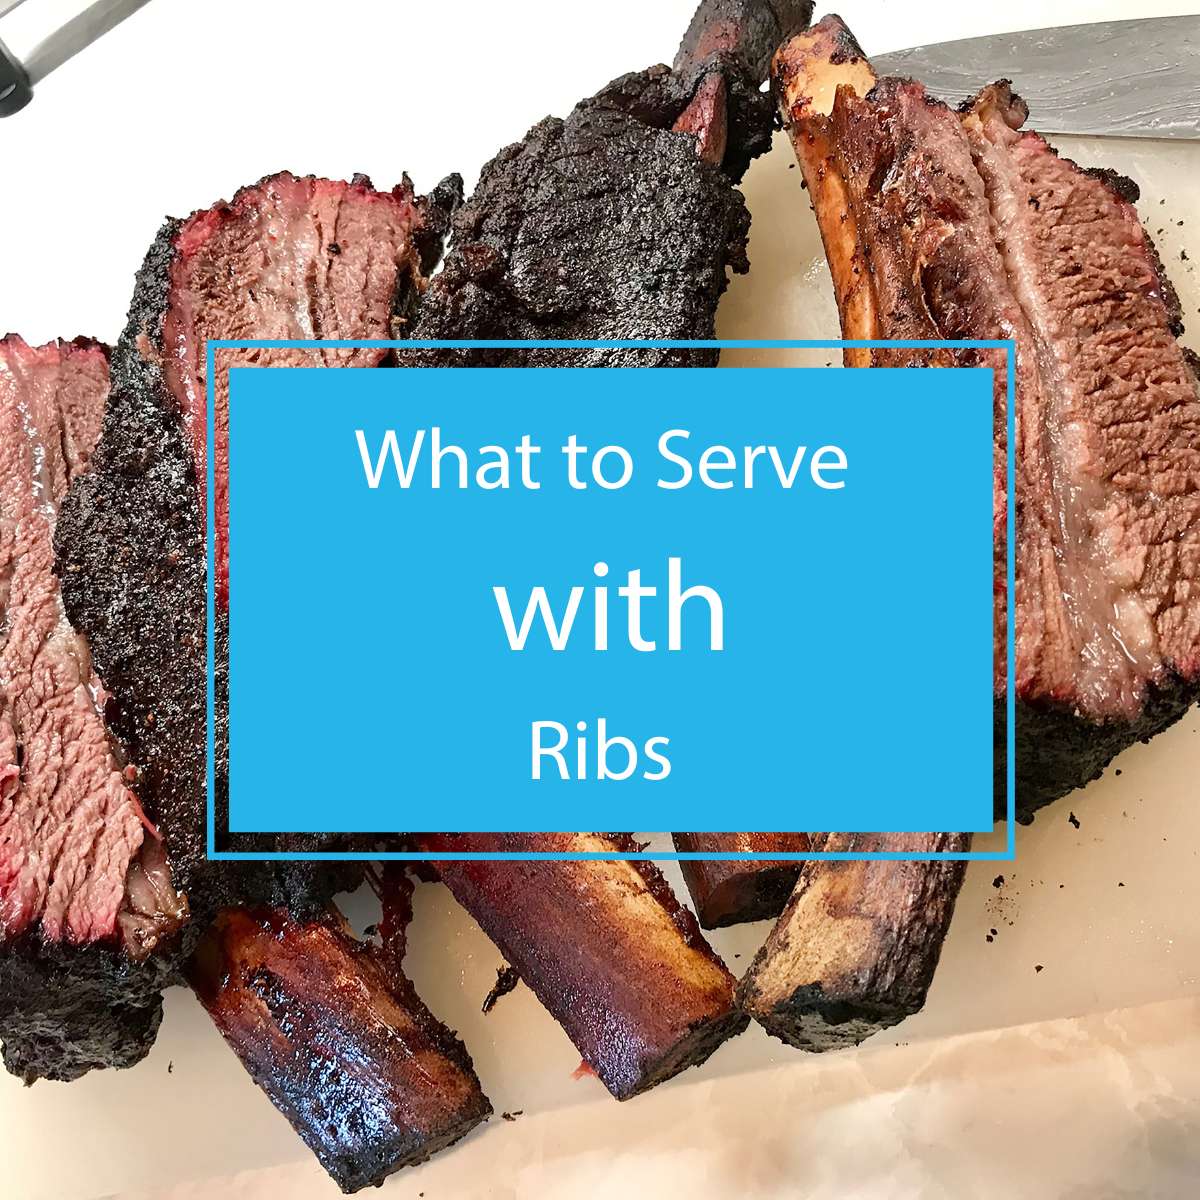 What to Serve with Ribs